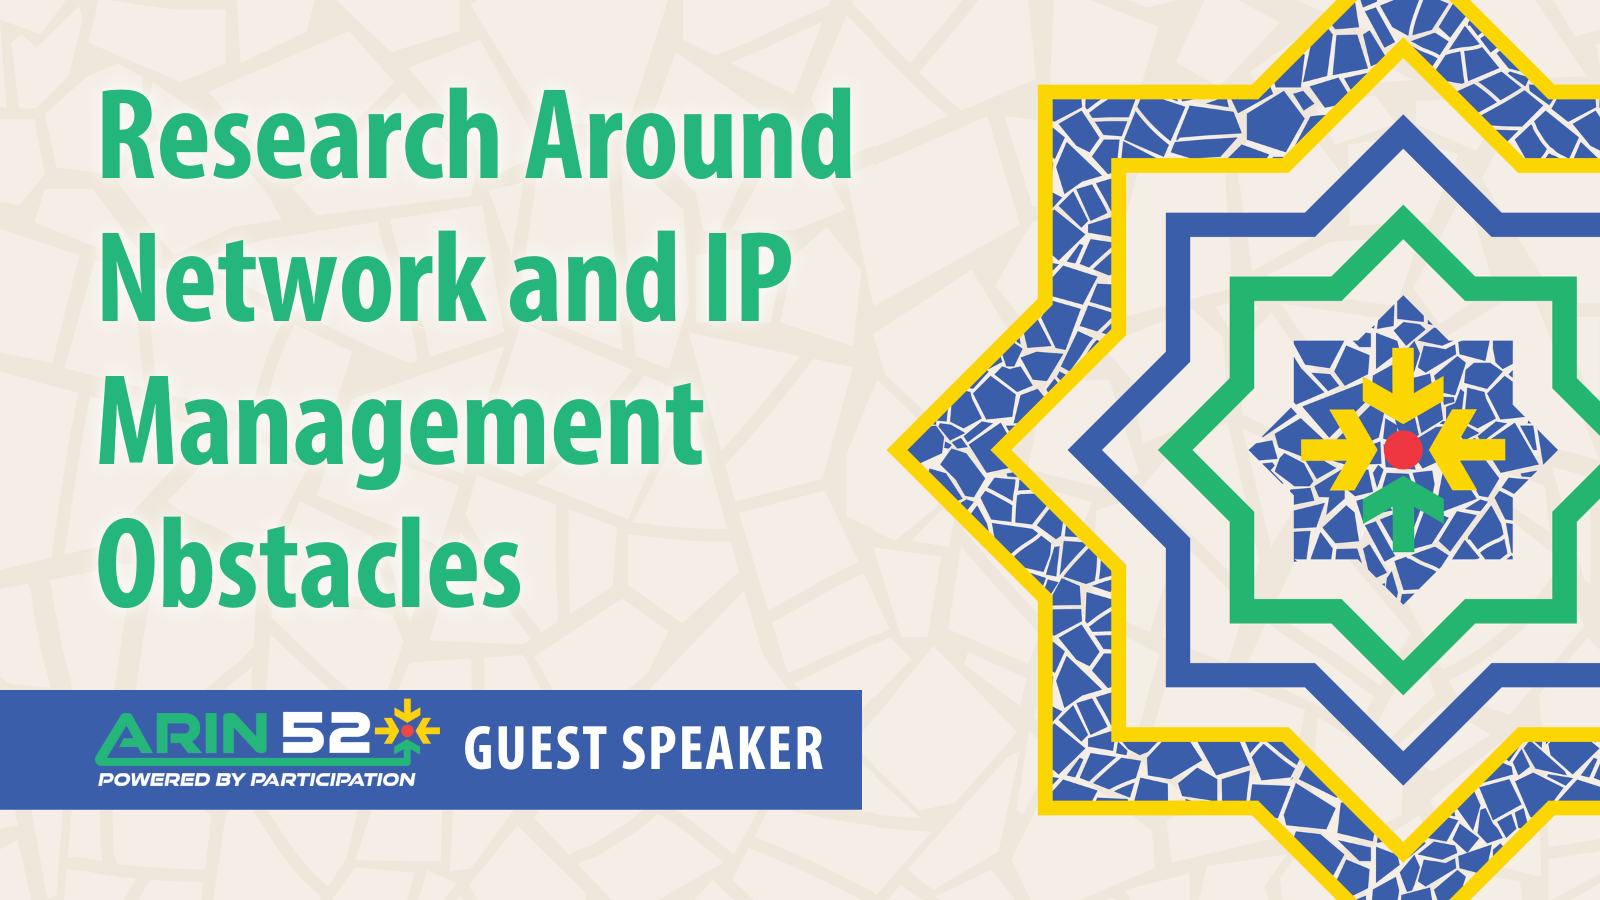 Research Around Network and IP Management Obstacles